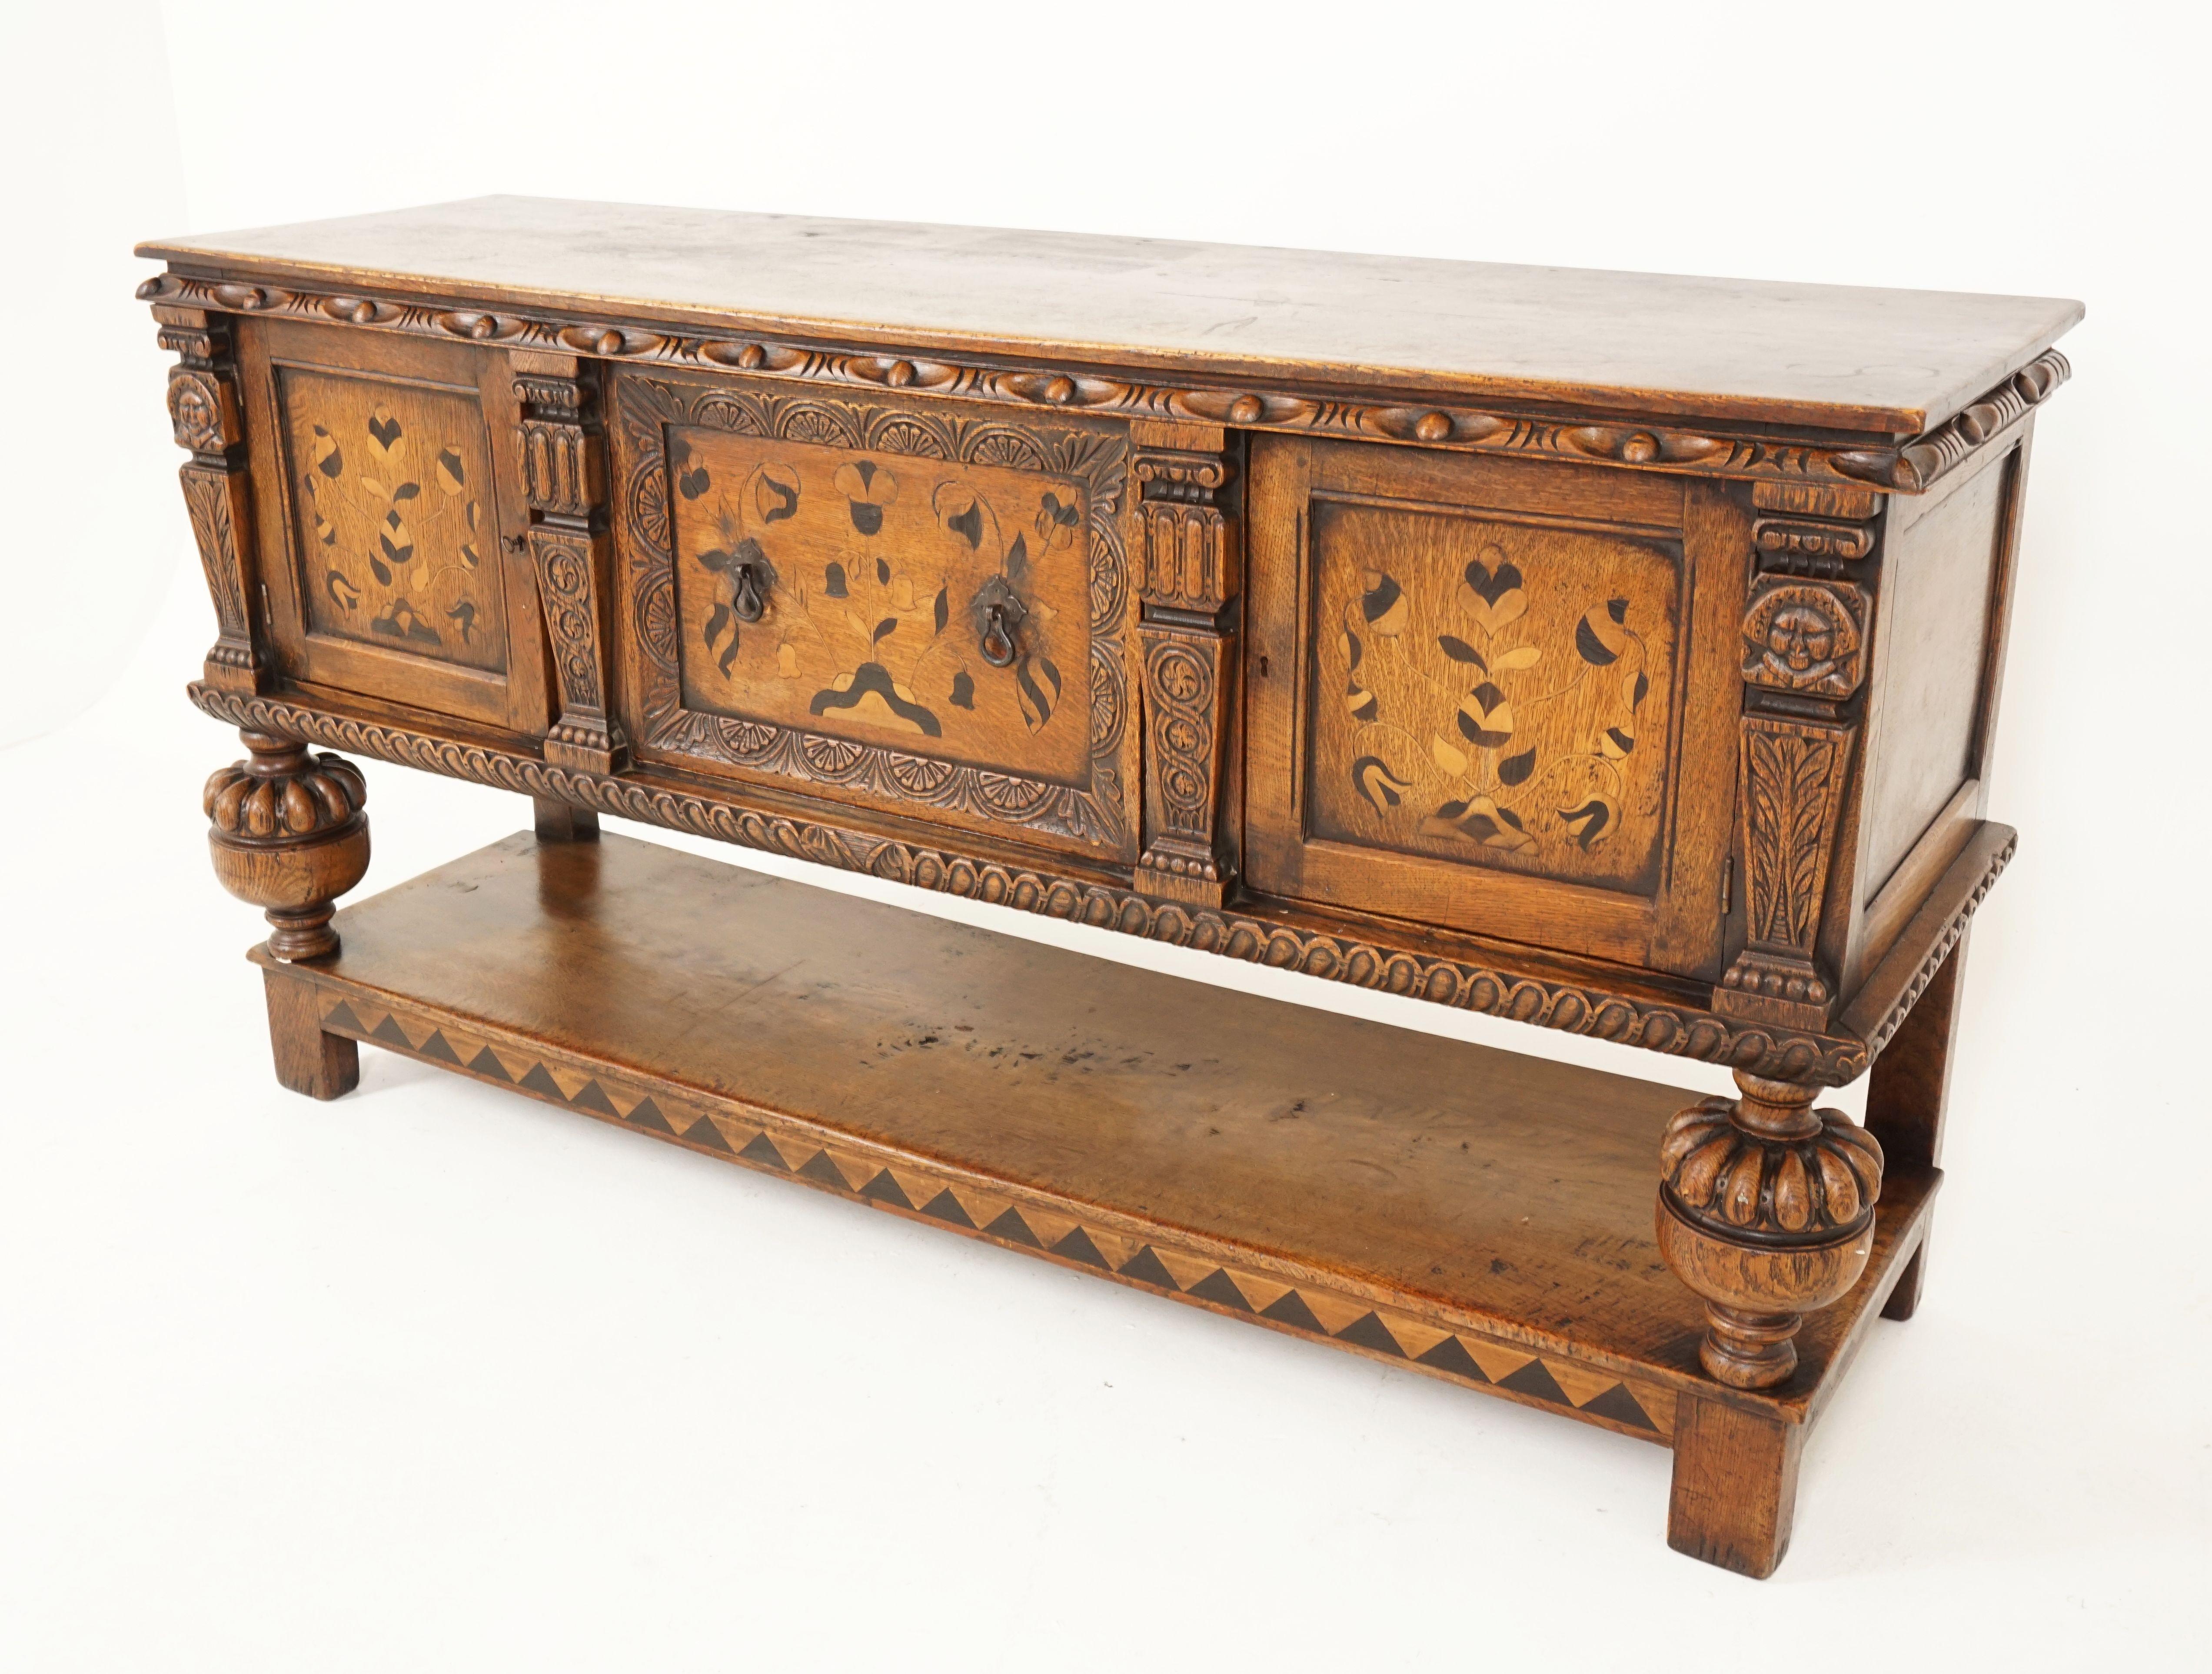 Antique carved oak sideboard, inlaid buffet, Scotland 1910, B2528

Scotland 1910
Solid oak + veneer
Original finish
Rectangular moulded top
Carved frieze underneath
Carved inlaid single drawer to the middle
With inlaid cupboards to each